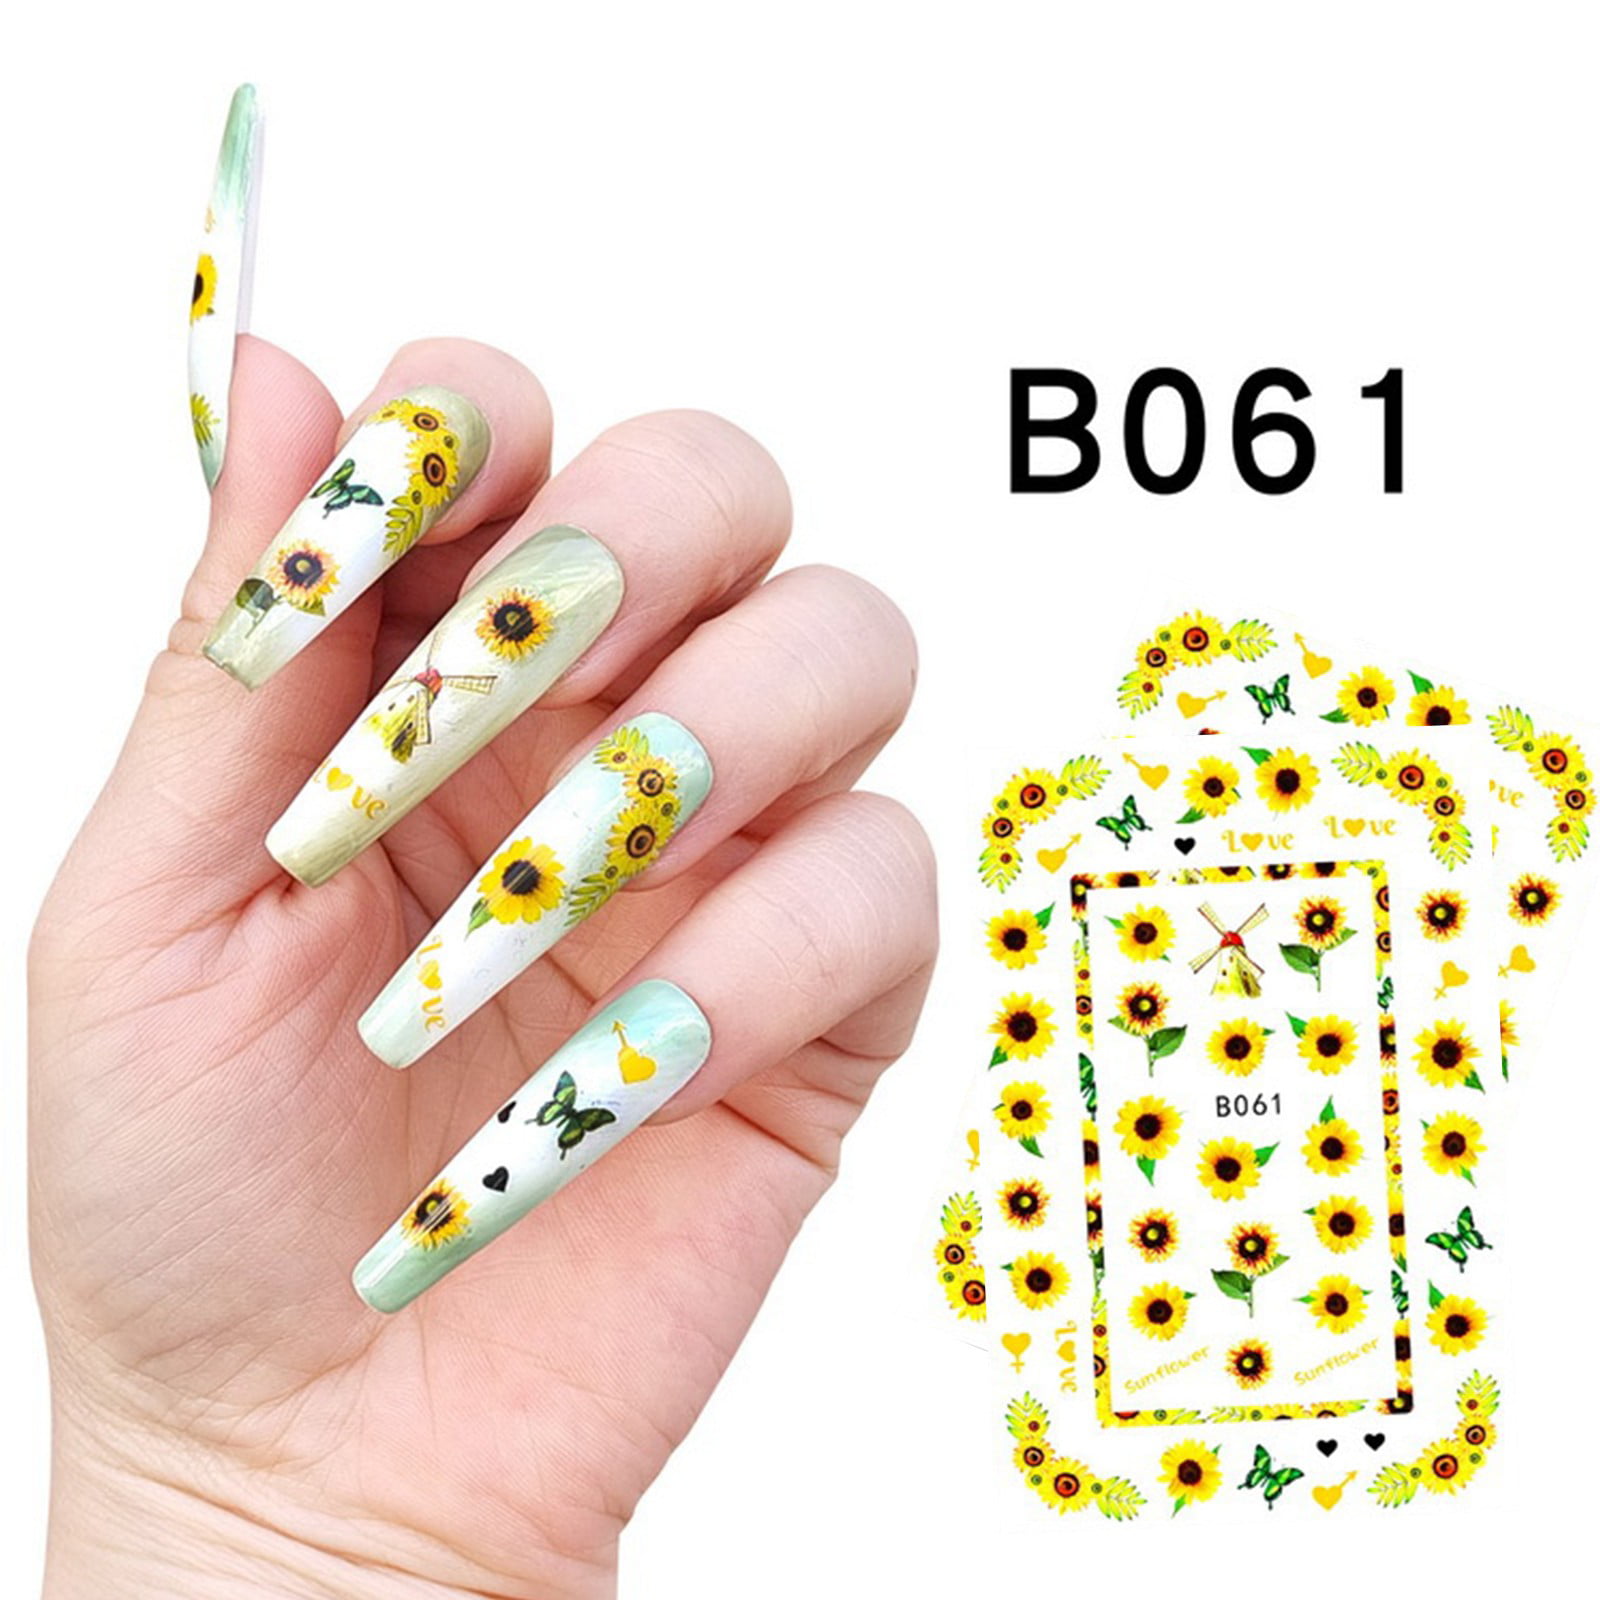 Buy 12 Sheets 3D Sunflower Nail Art Stickers at Ubuy UK